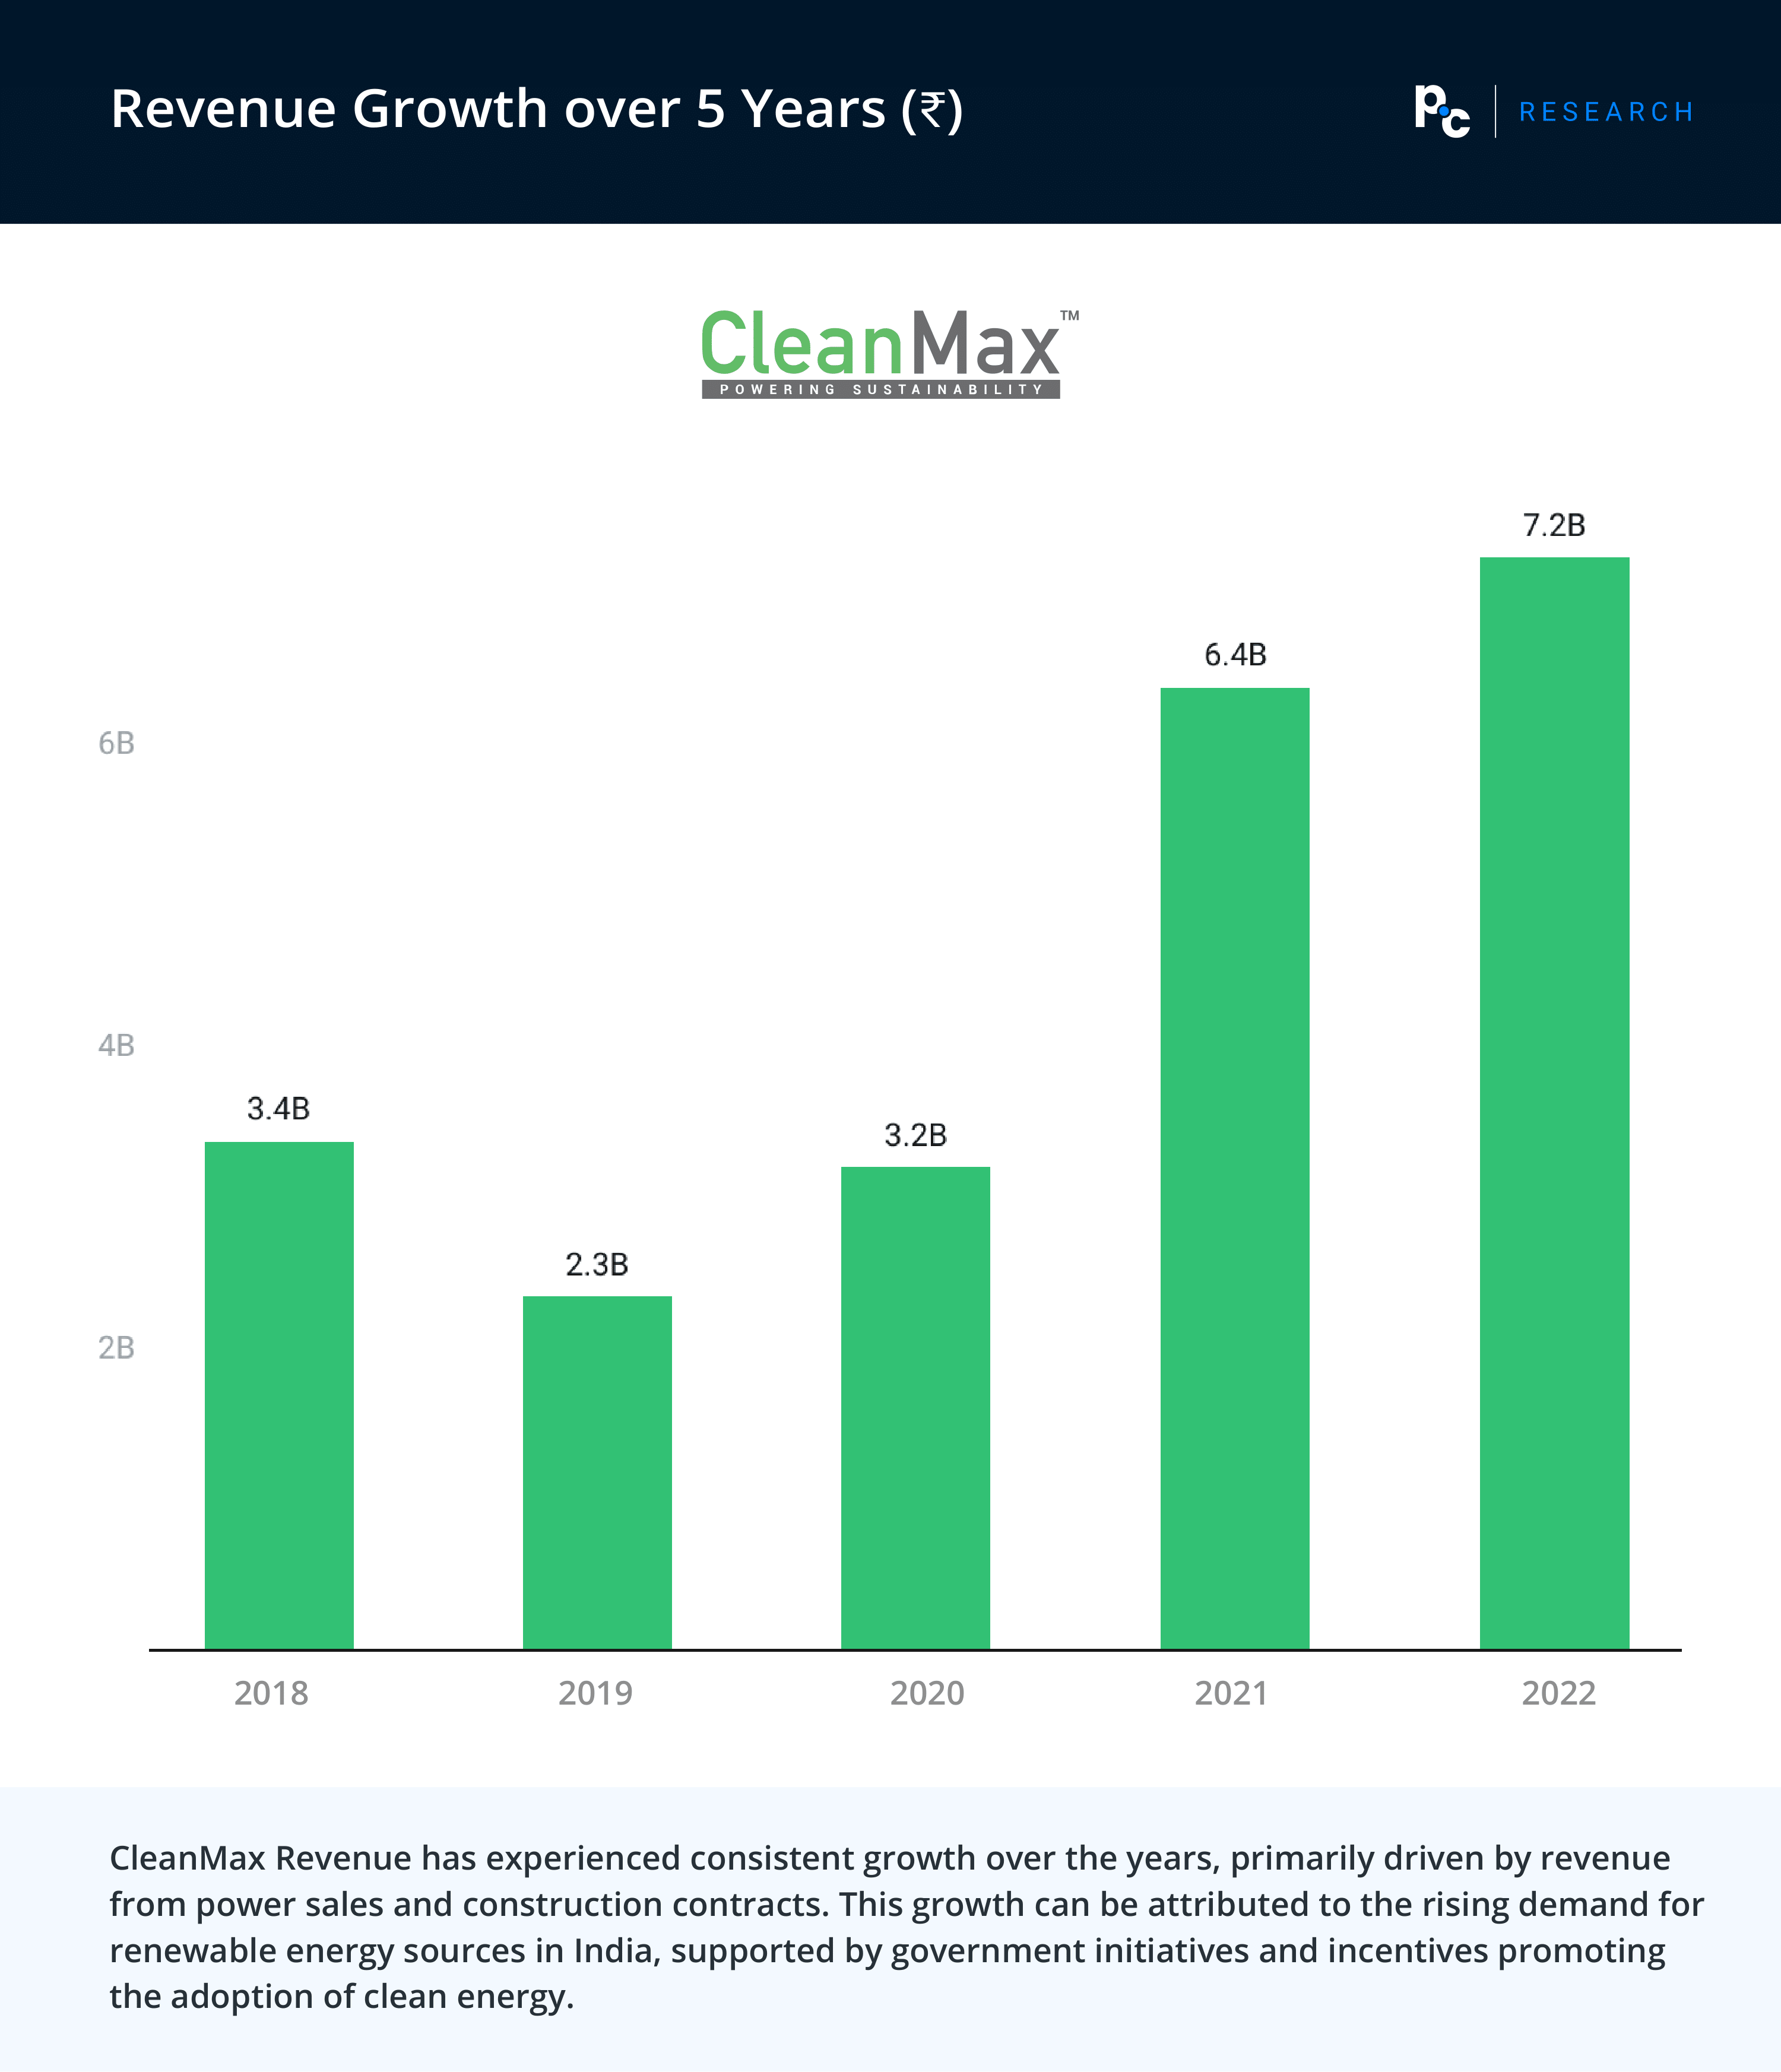 CleanMax revenue Growth over 5 Years (₹).

CleanMax Revenue has experienced consistent growth over the years, primarily driven by revenue from power sales and construction contracts. This growth can be attributed to the rising demand for renewable energy sources in India, supported by government initiatives and incentives promoting the adoption of clean energy.
